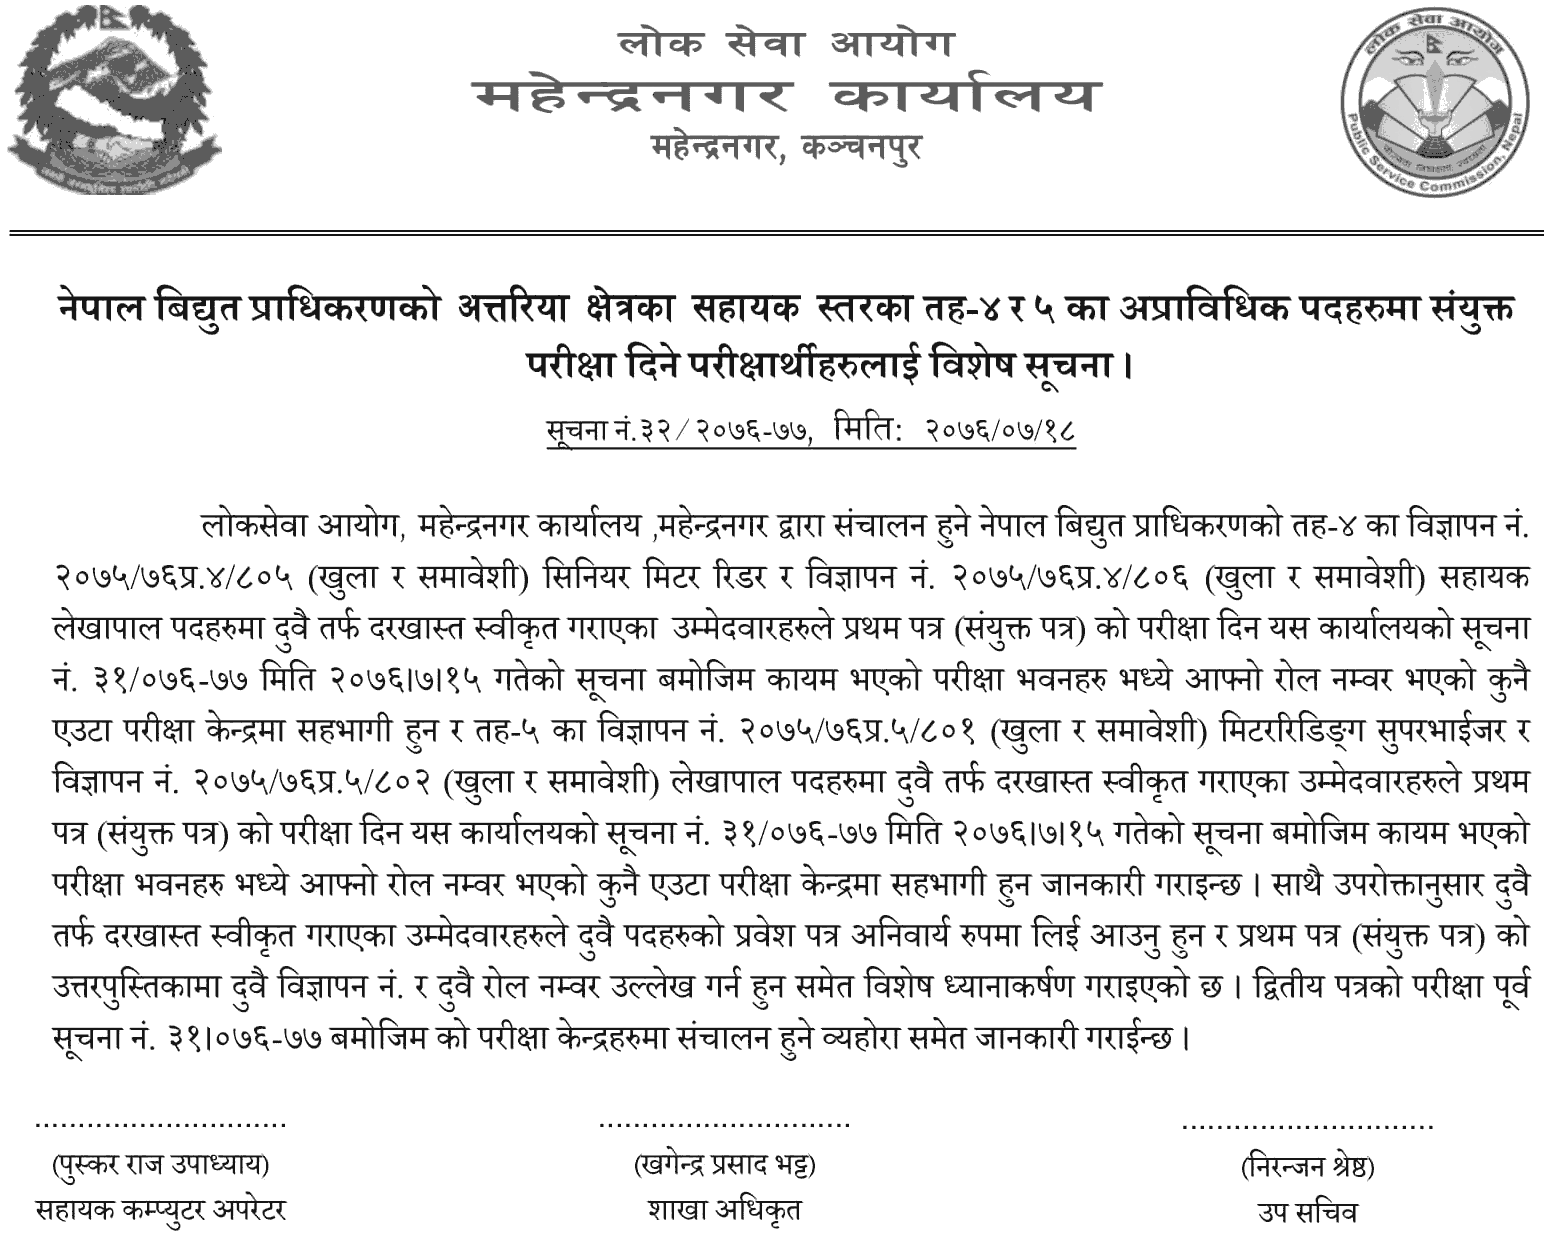 Nepal Electricity Authority Mahendranagar Exam Center notice for Unified Candidates